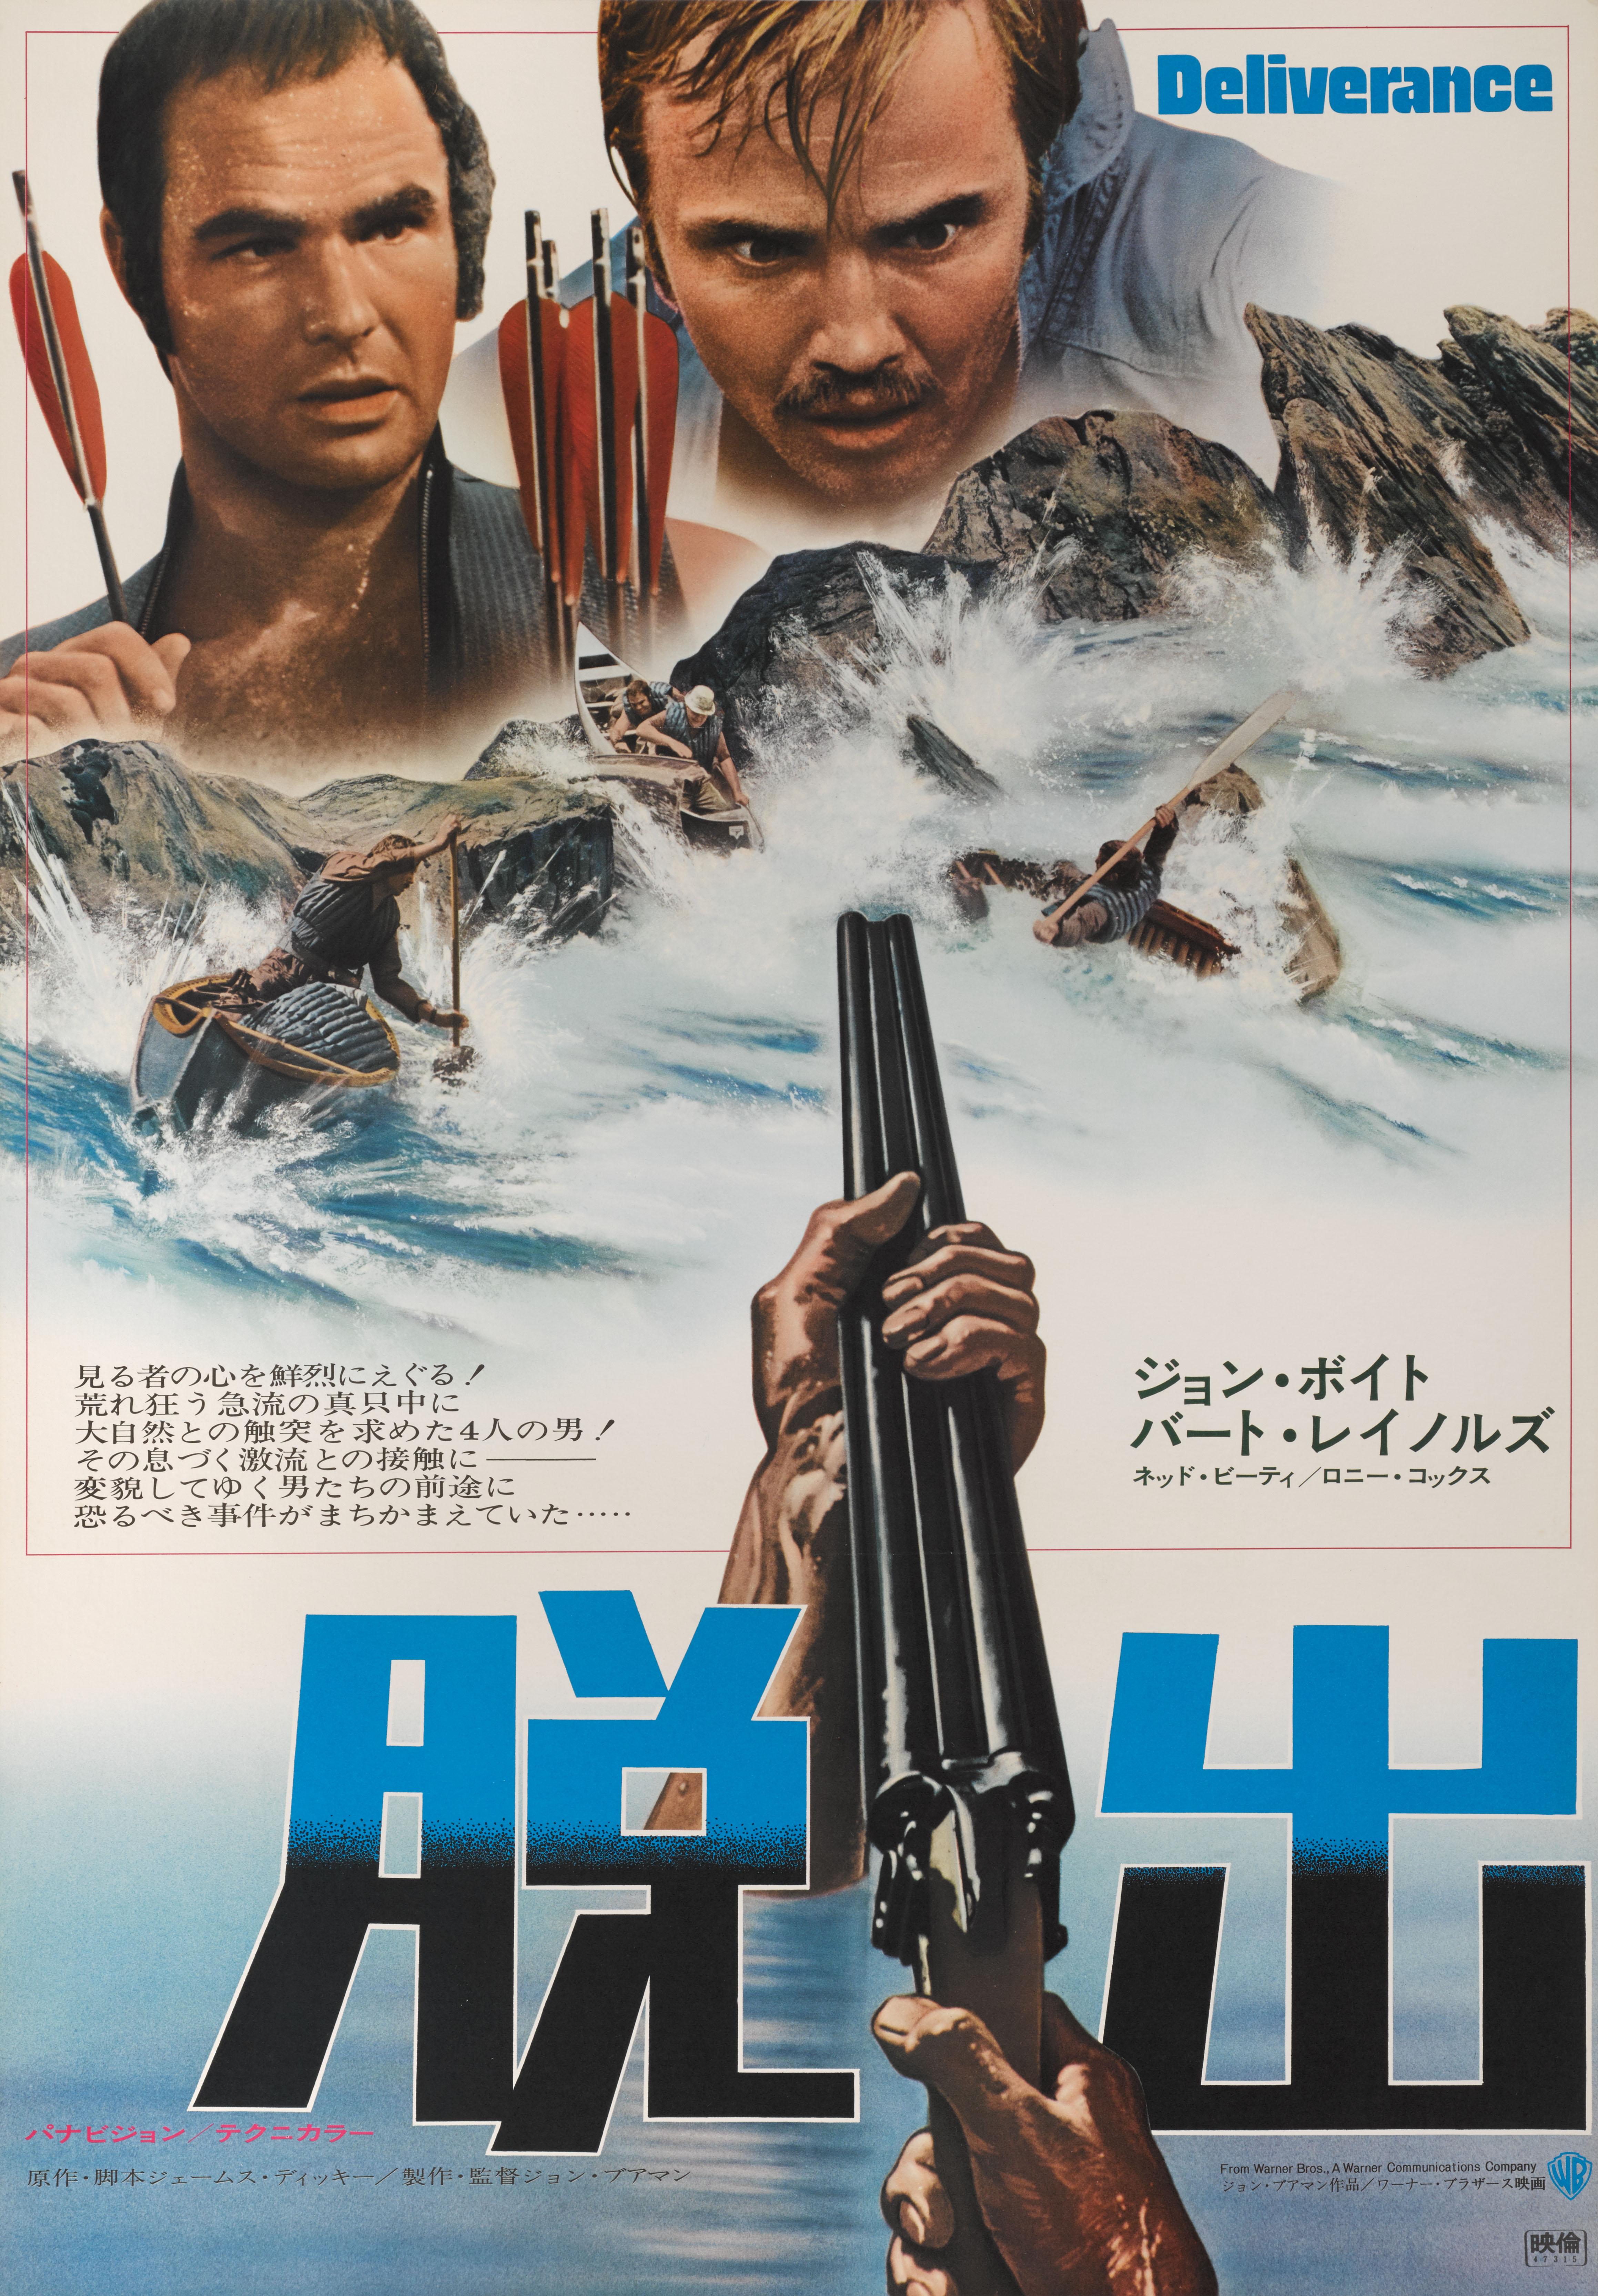 Original Japanese poster for the film Deliverance (1972) Directed by John Boorman and starring Burt Reynolds, Jon Voight.
The art work on this poster is unique to the films Japanese release.
The poster is conservation linen backed and would be